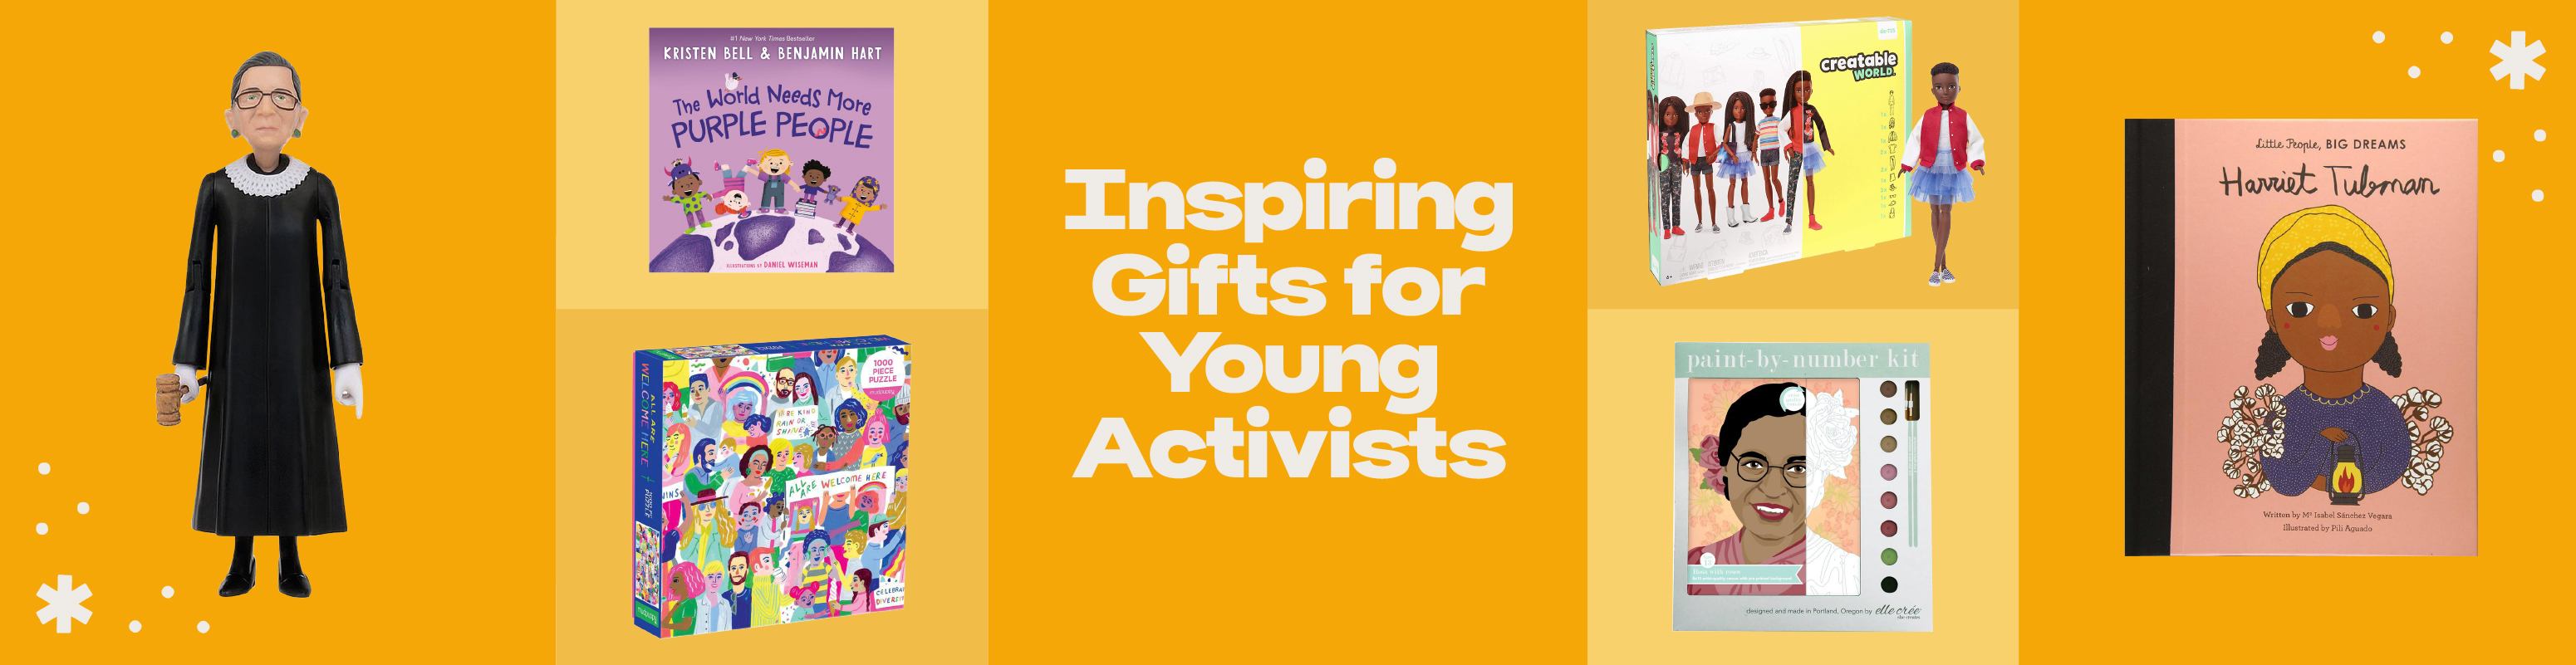 Inspiring Gifts for Young Activists header